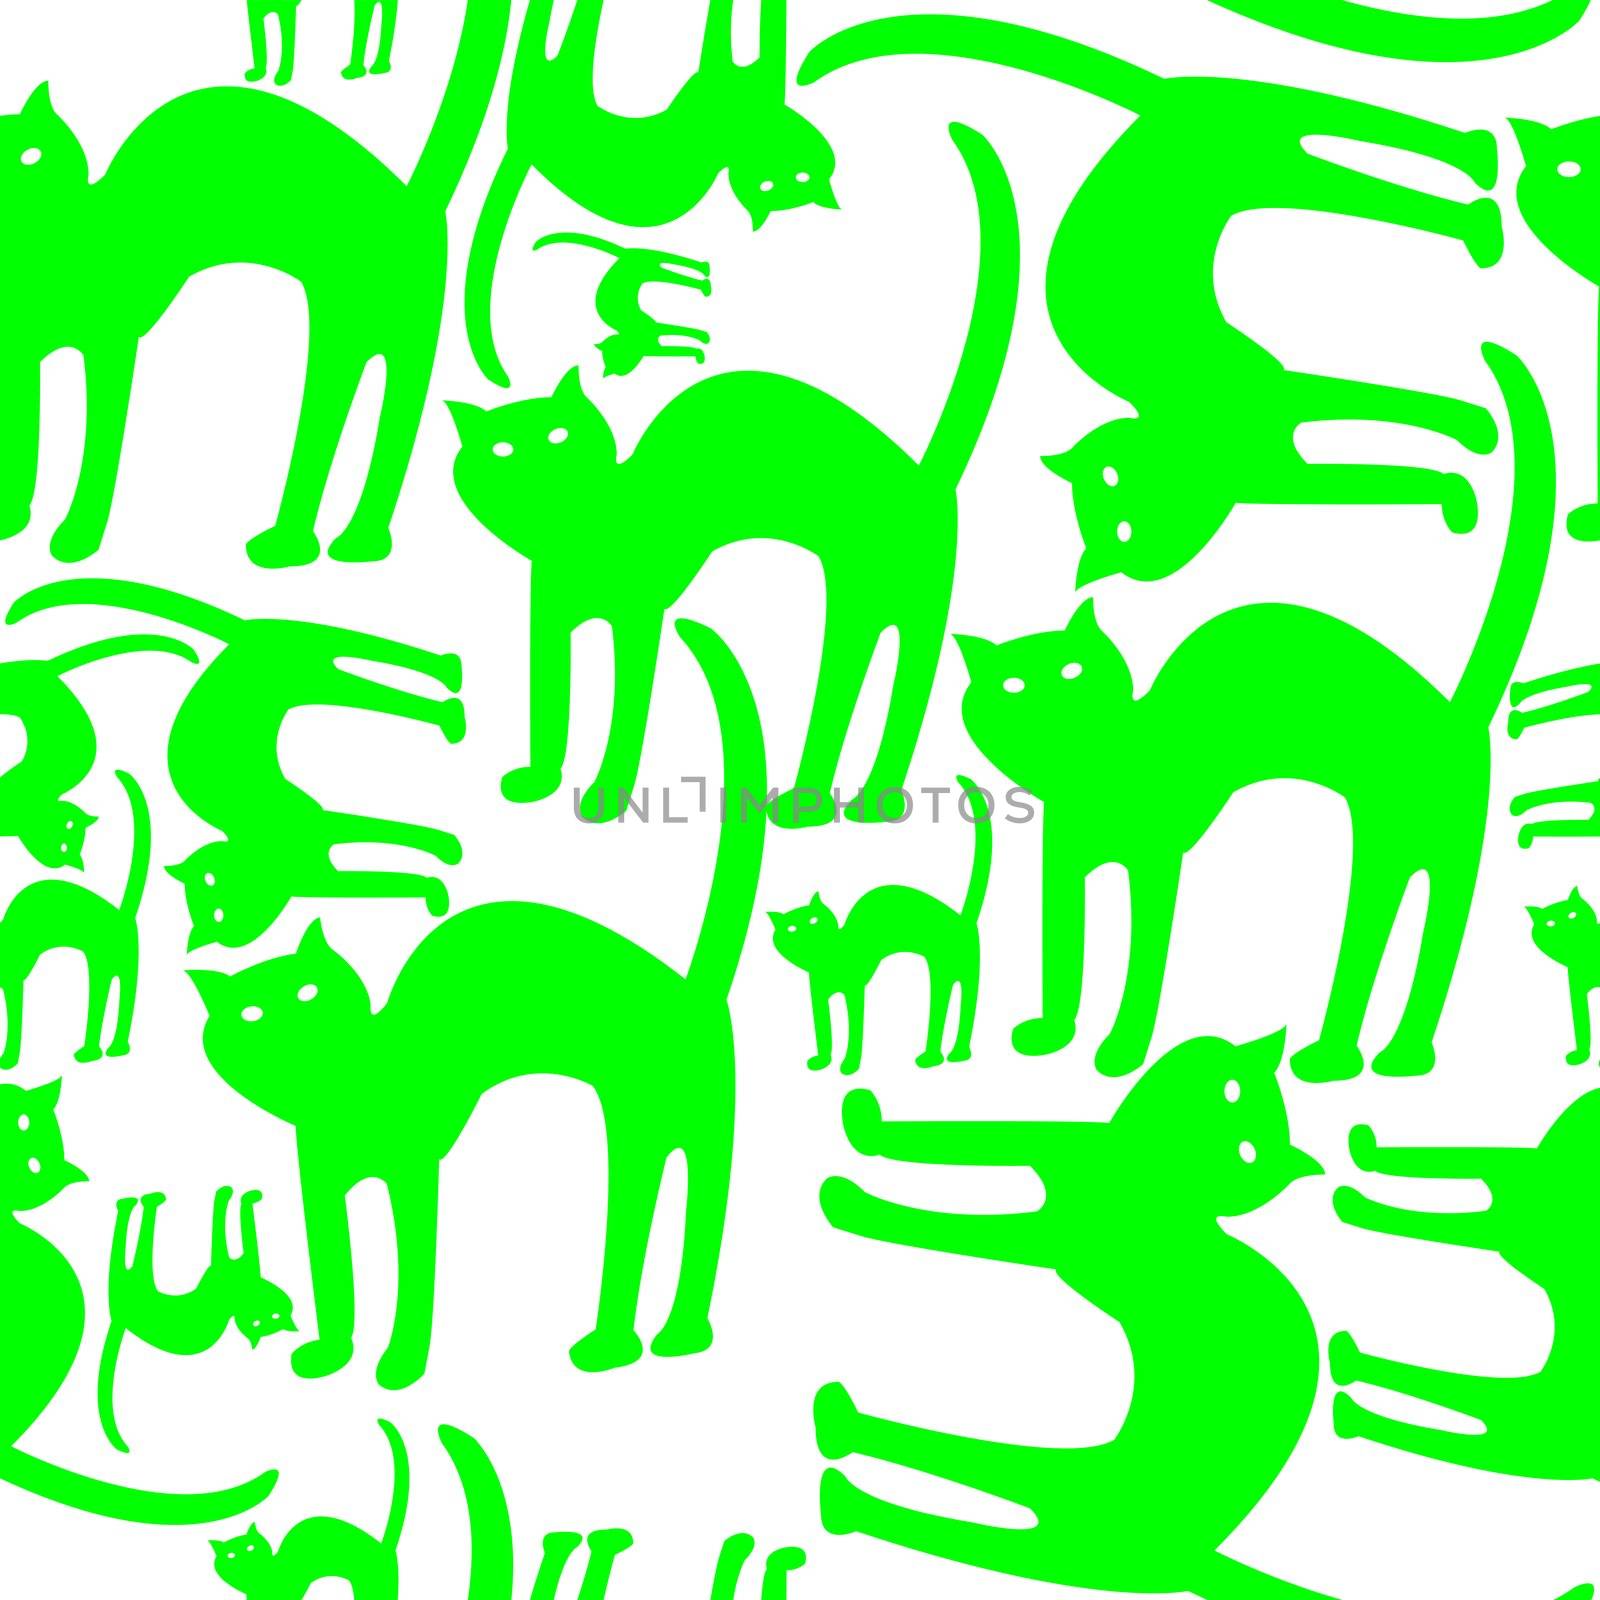 green cats pattern isolated on white background, abstract art illustration